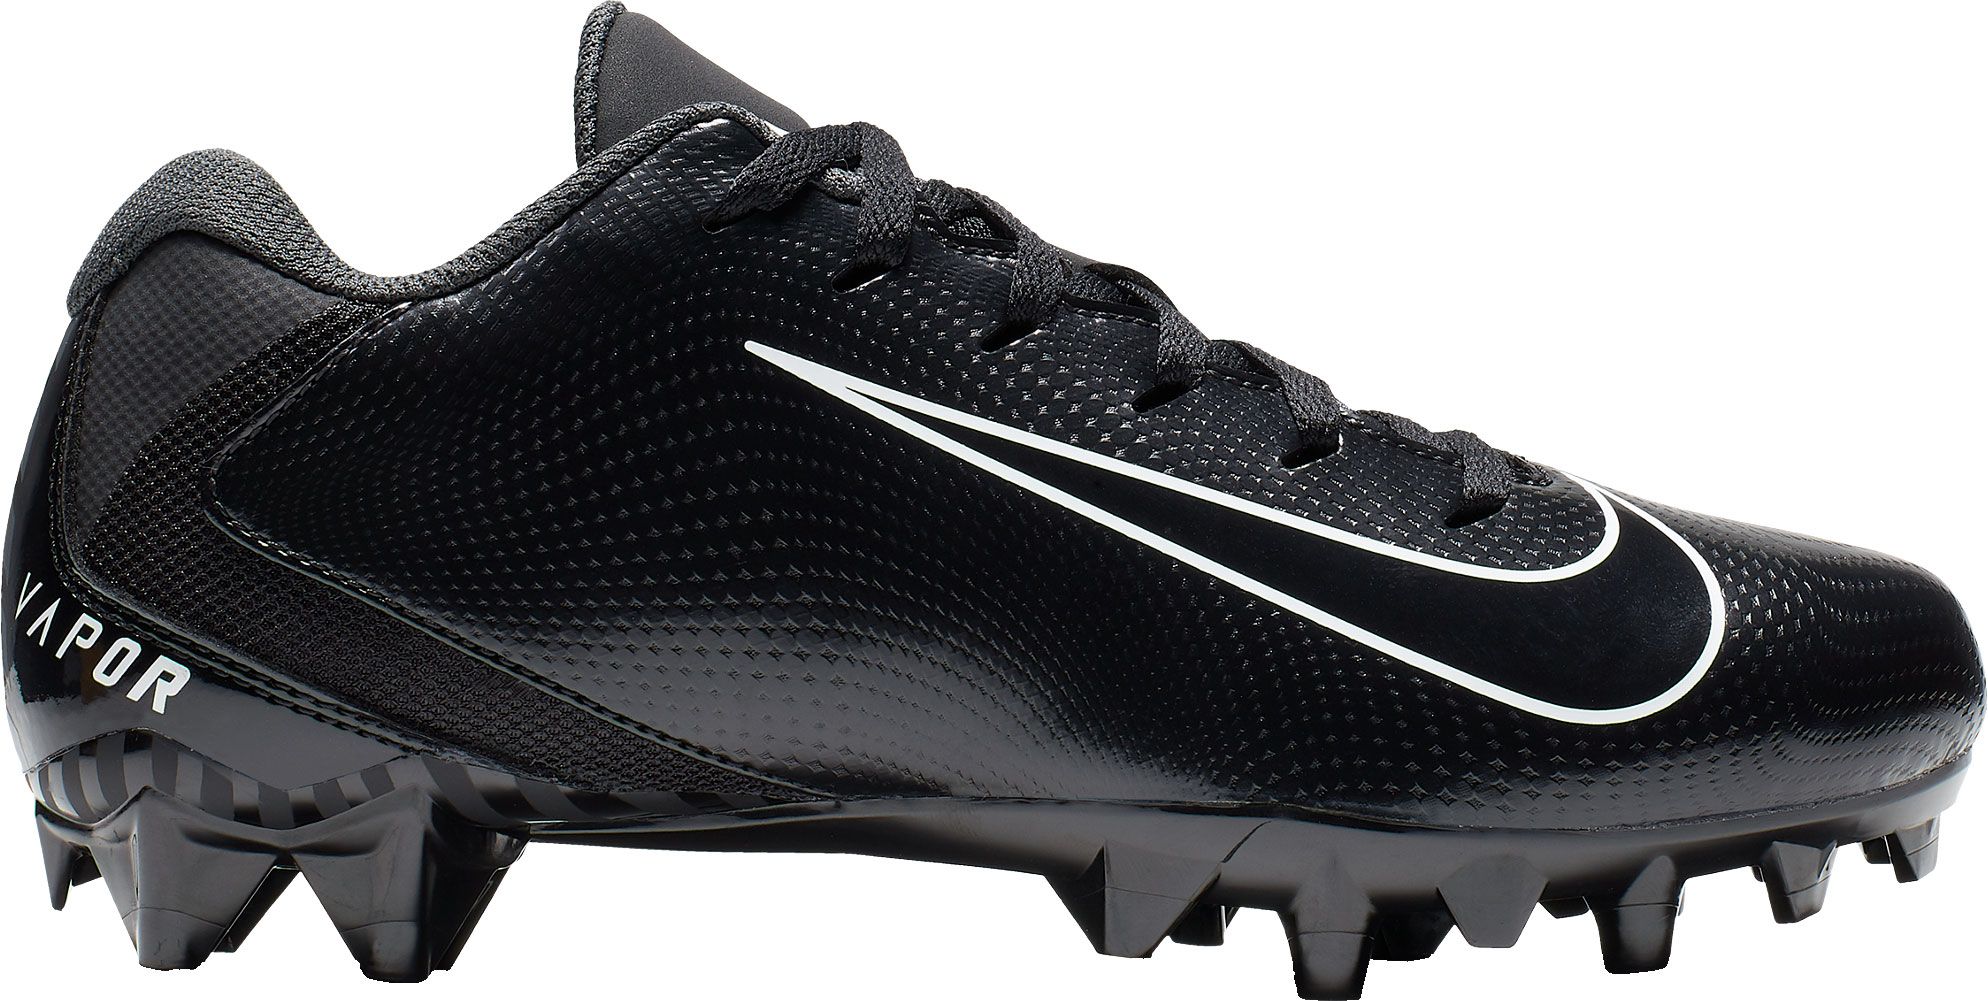 size 13c football cleats cheap online